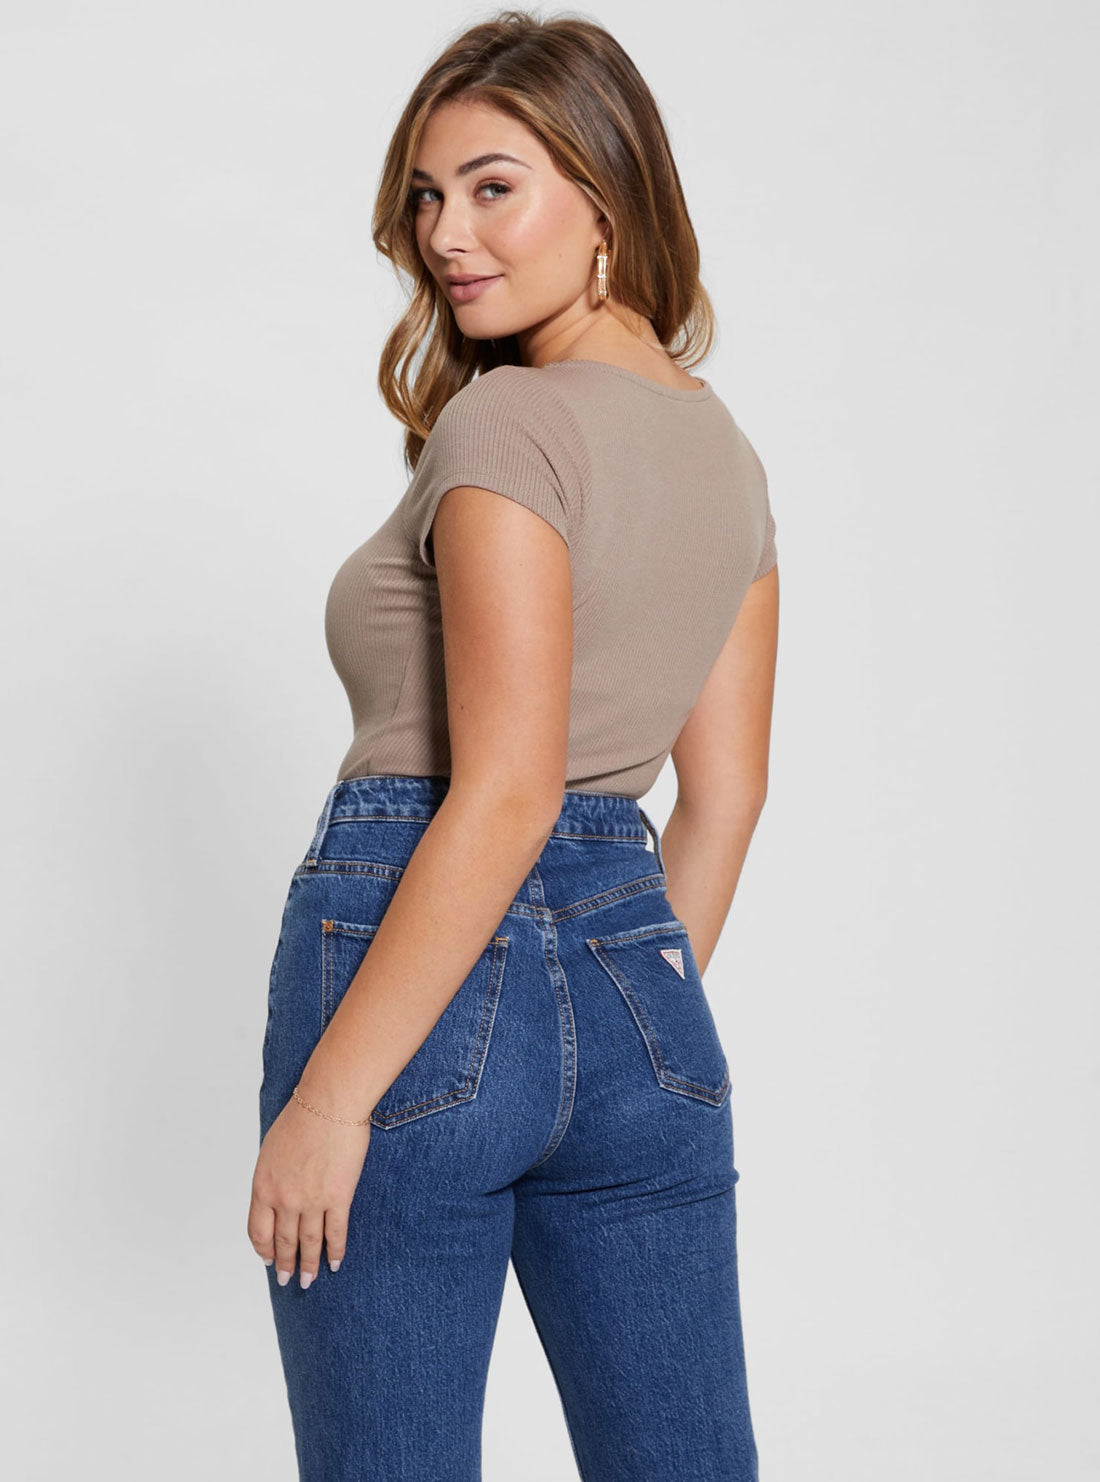 Eco Taupe Karlee Jewel Henley T-Shirt | GUESS Women's Apparel | back view